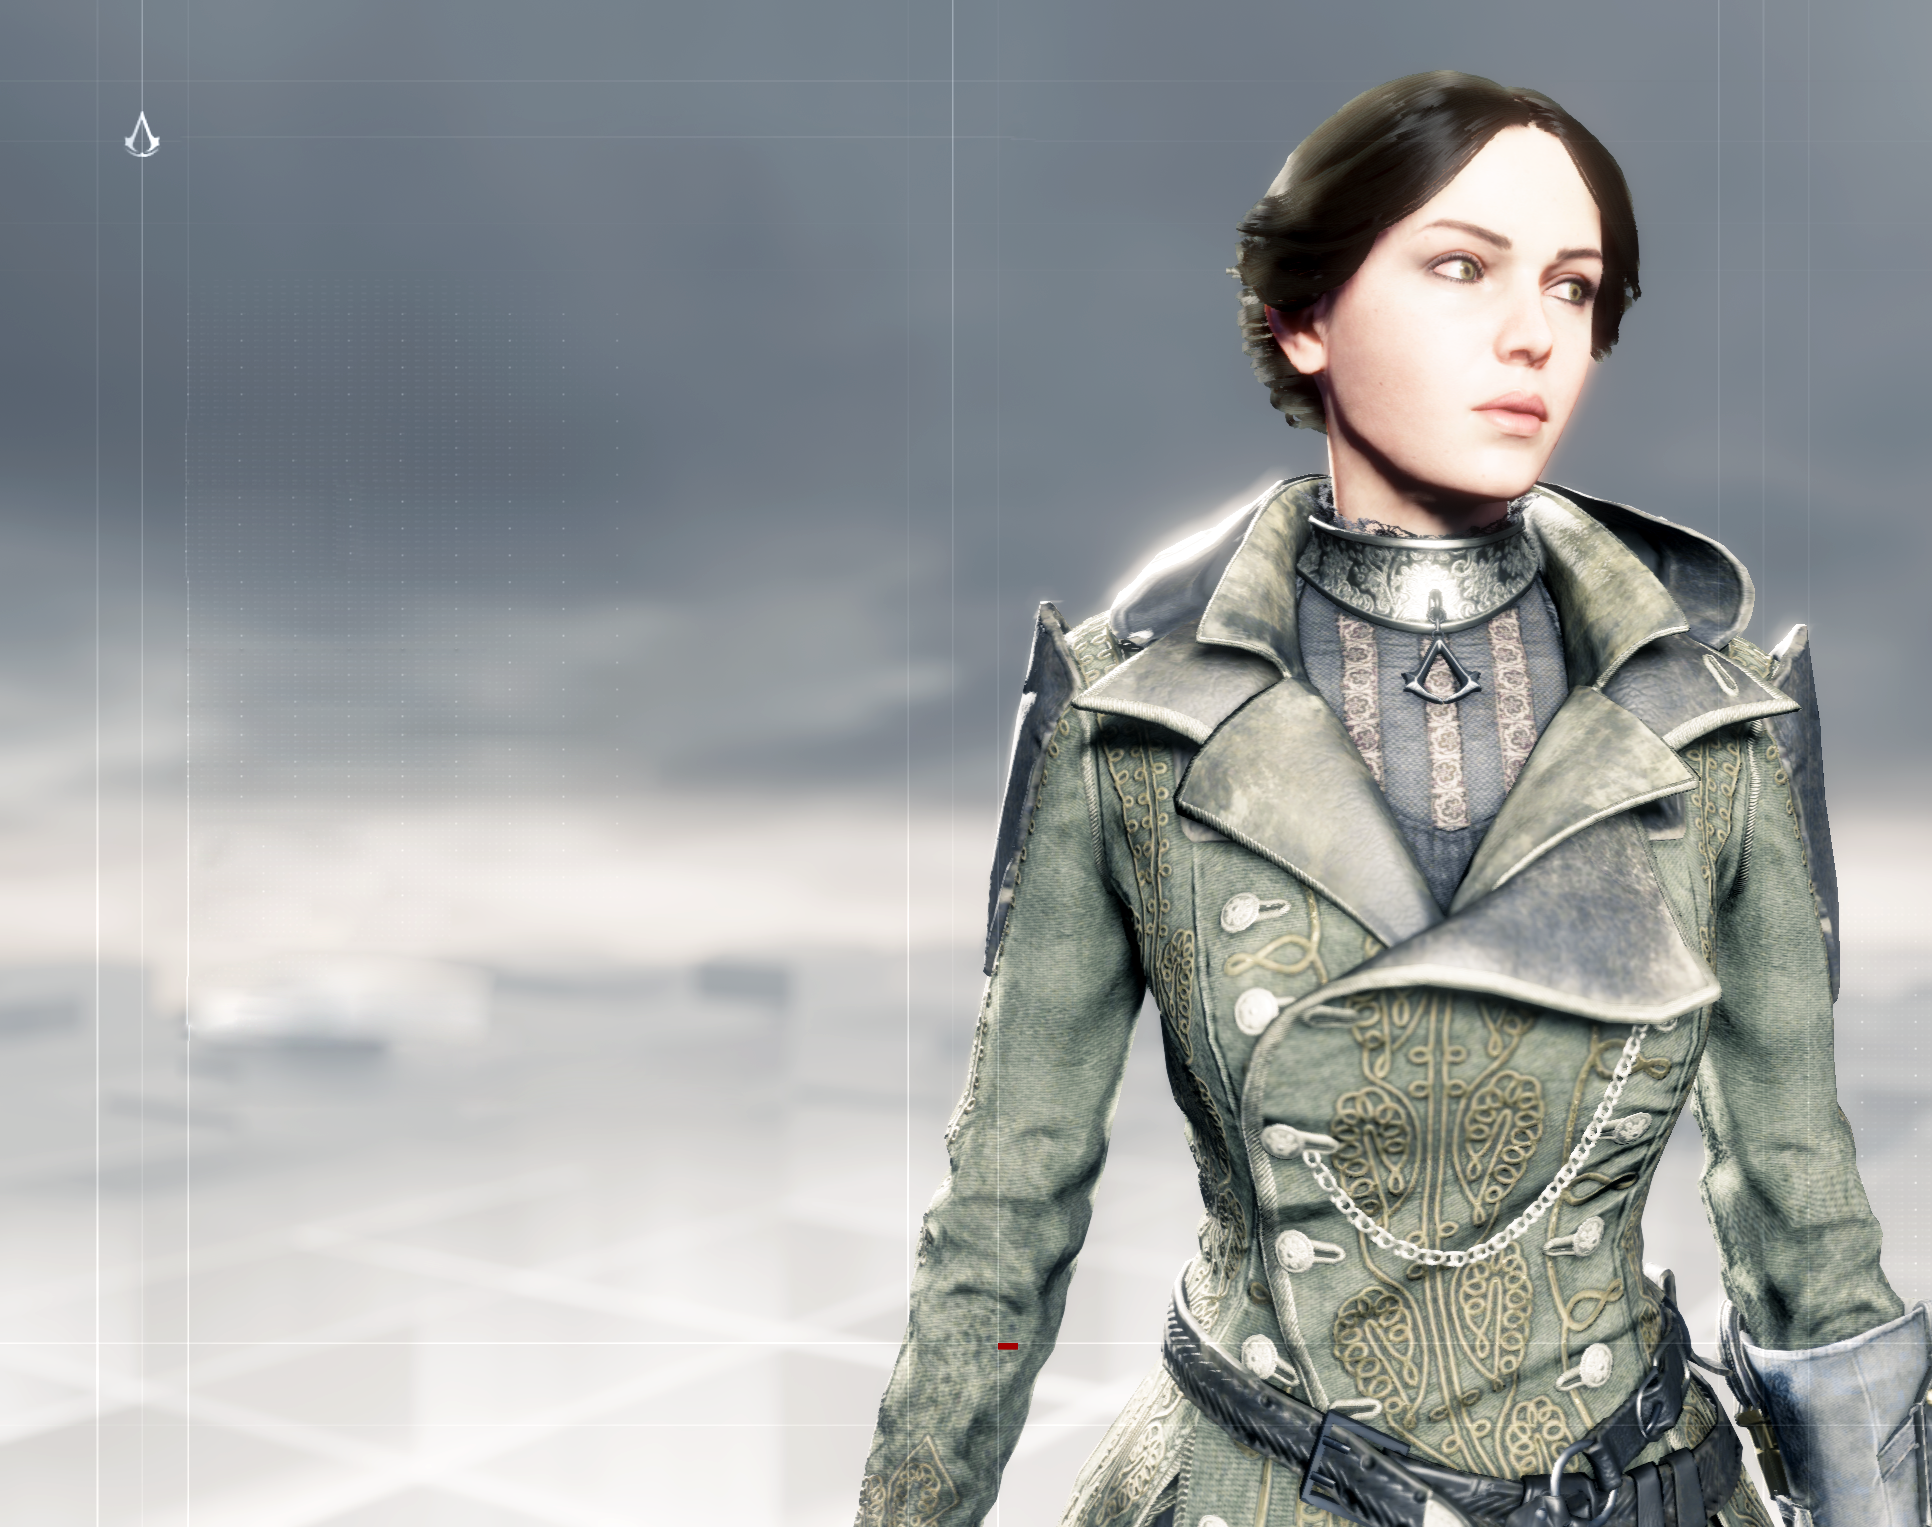 General 1932x1527 Assassin's Creed Lydia Frye Assassin's Creed Syndicate Ubisoft video games video game characters